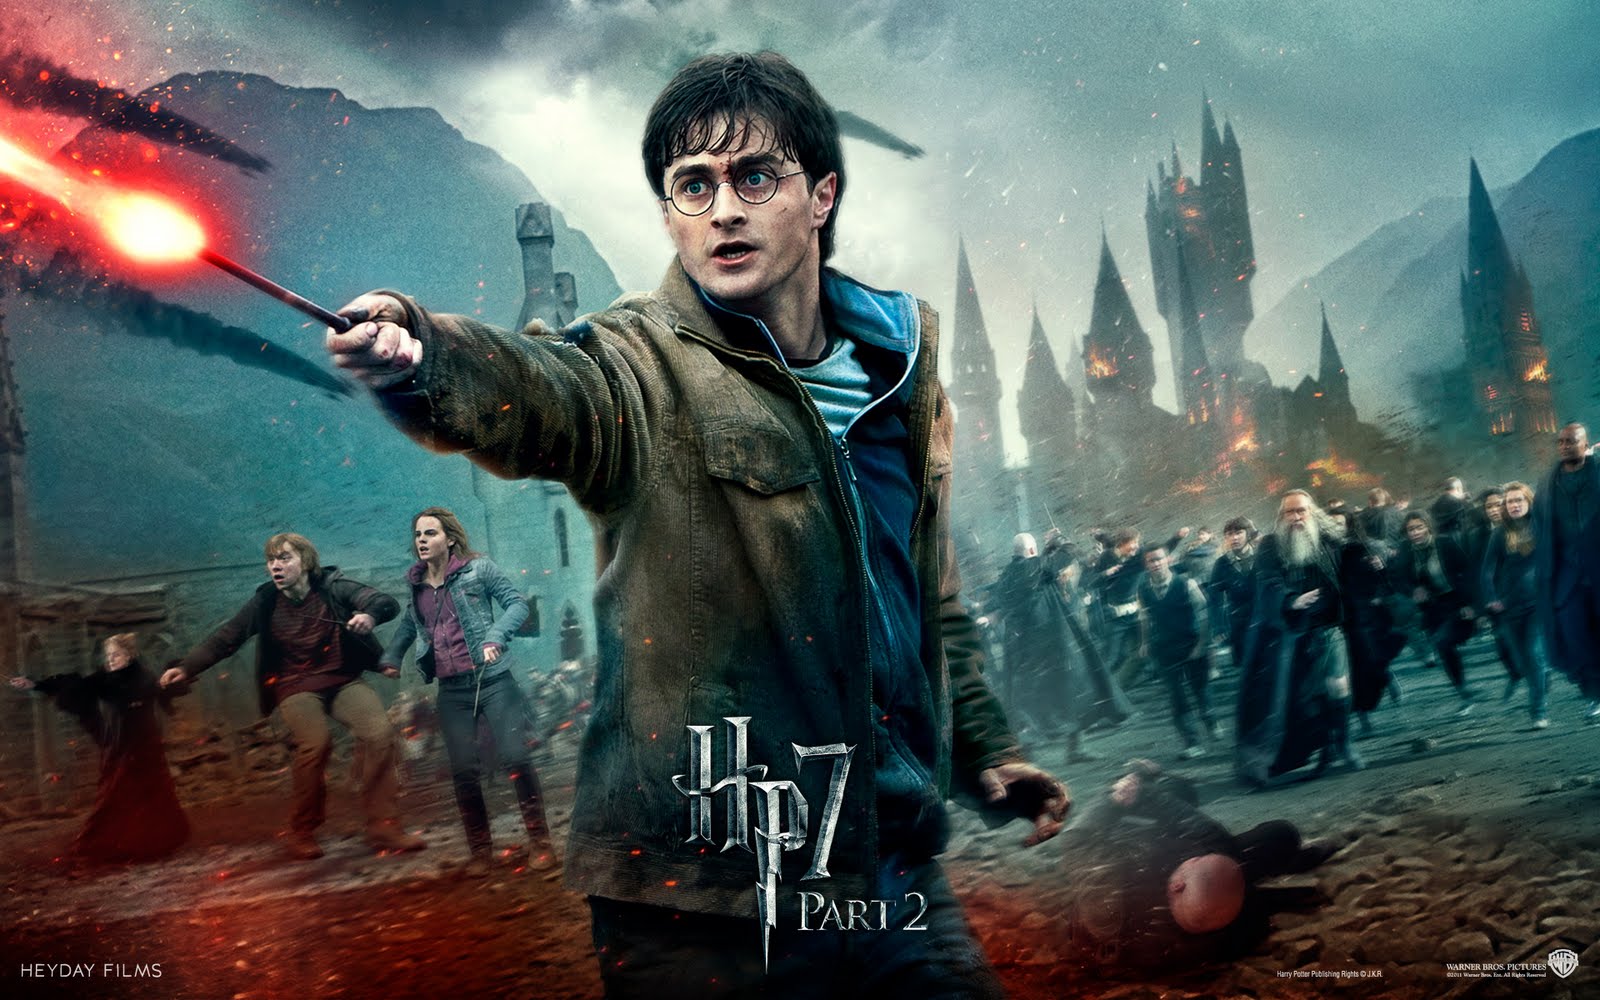 Harry Potter and the Deathly Hallows: Part 2 - Plugged In